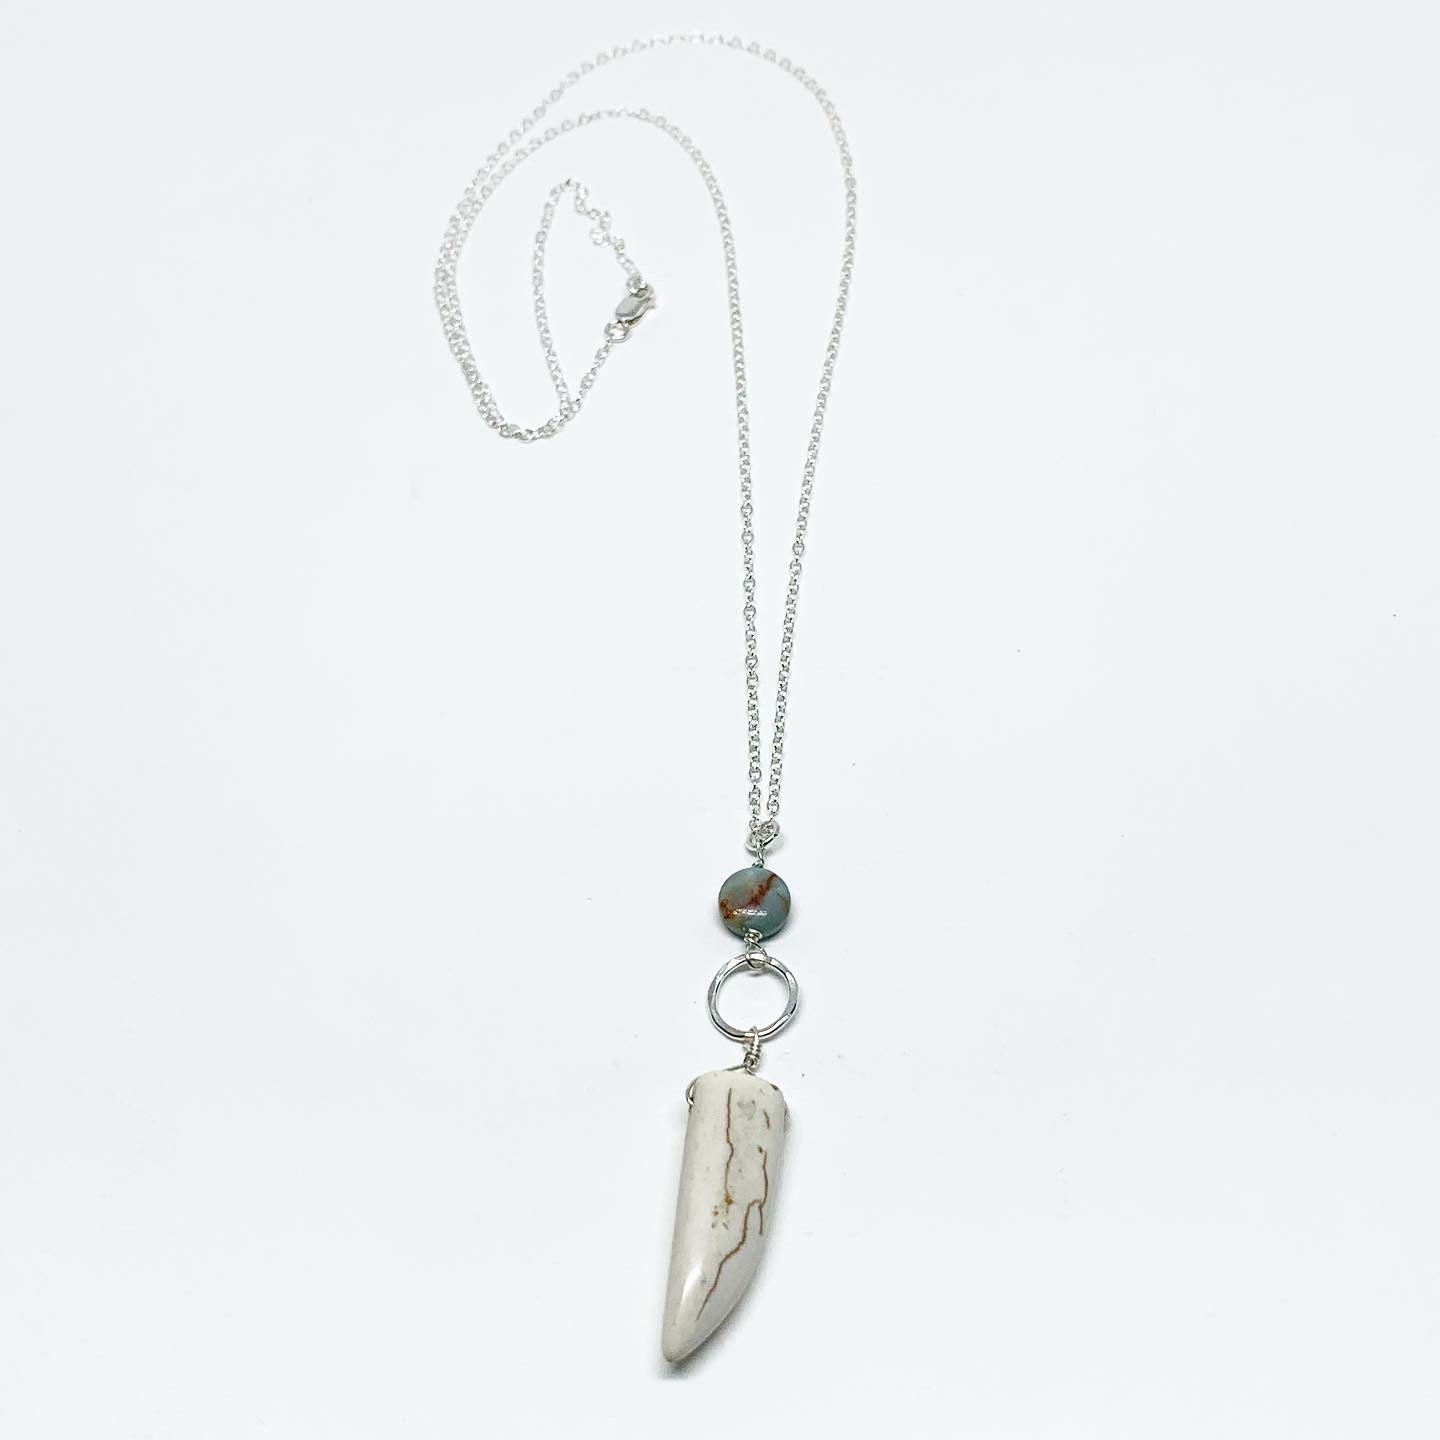 Turquoise and Howlite Charm Necklace - Jennifer Cervelli Jewelry